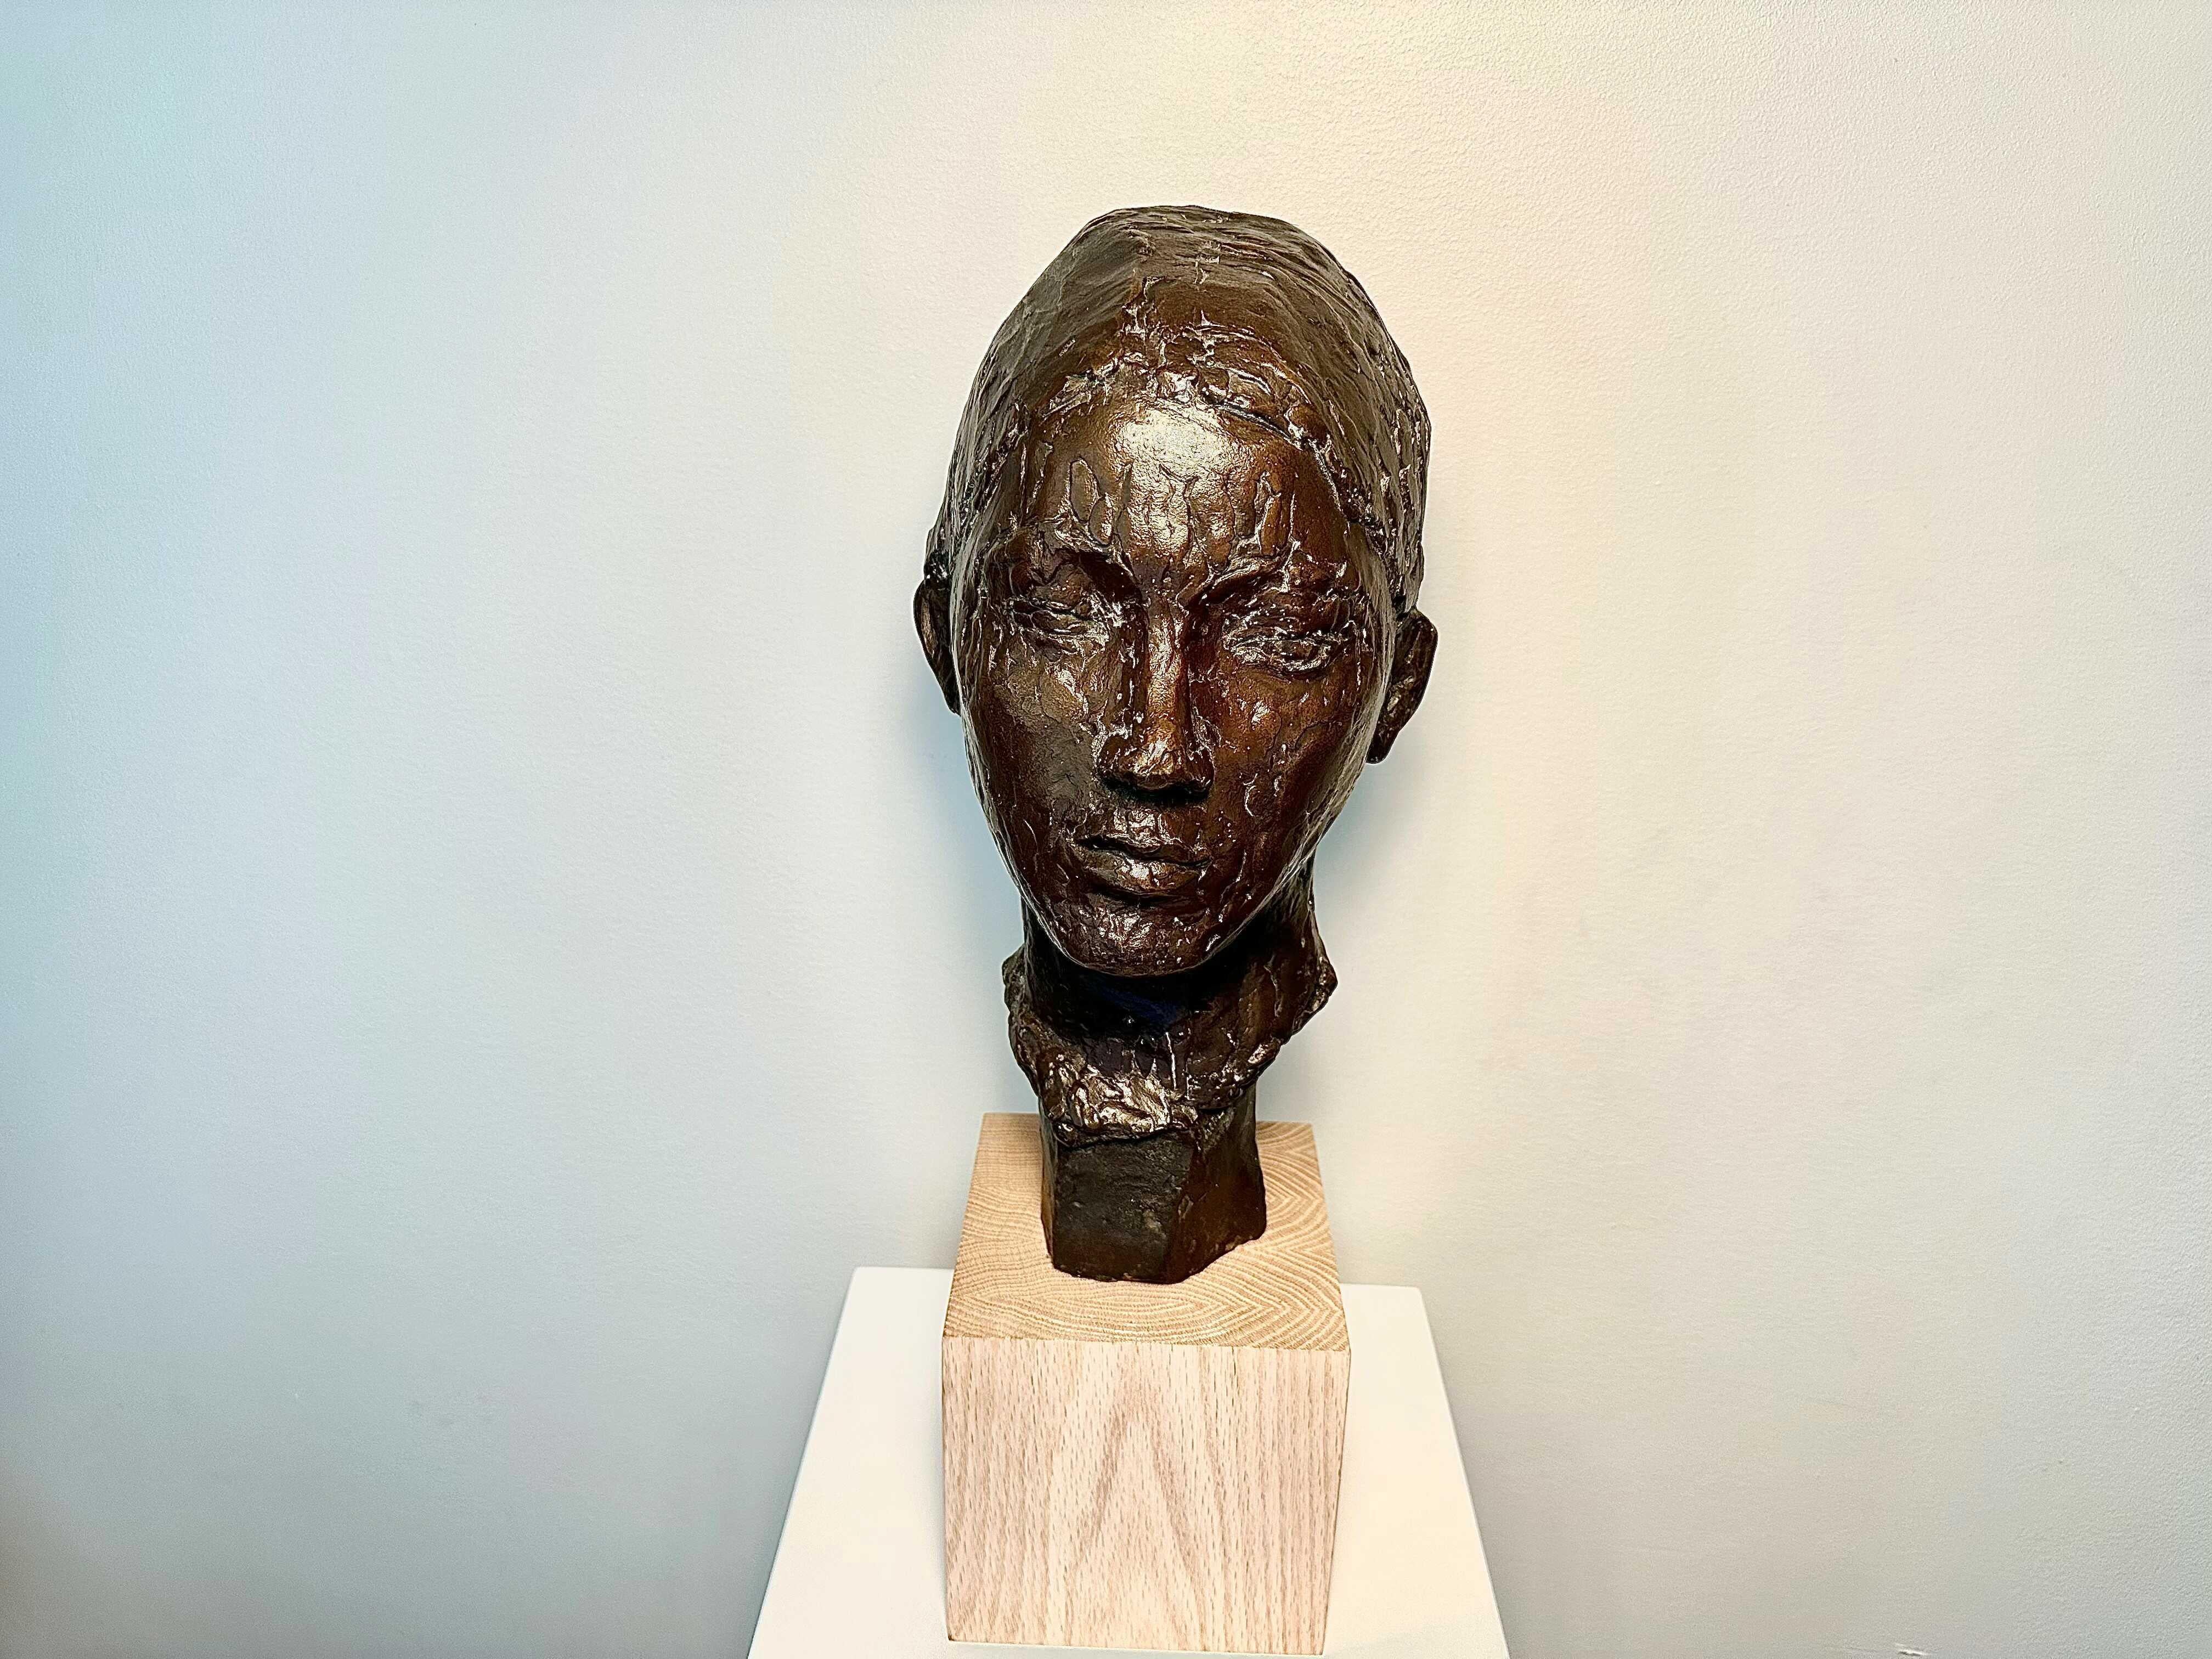 Inspired by the head of Apollo by Antoine Bourdelle. A woman with strong firm but still vulnerable expresson.